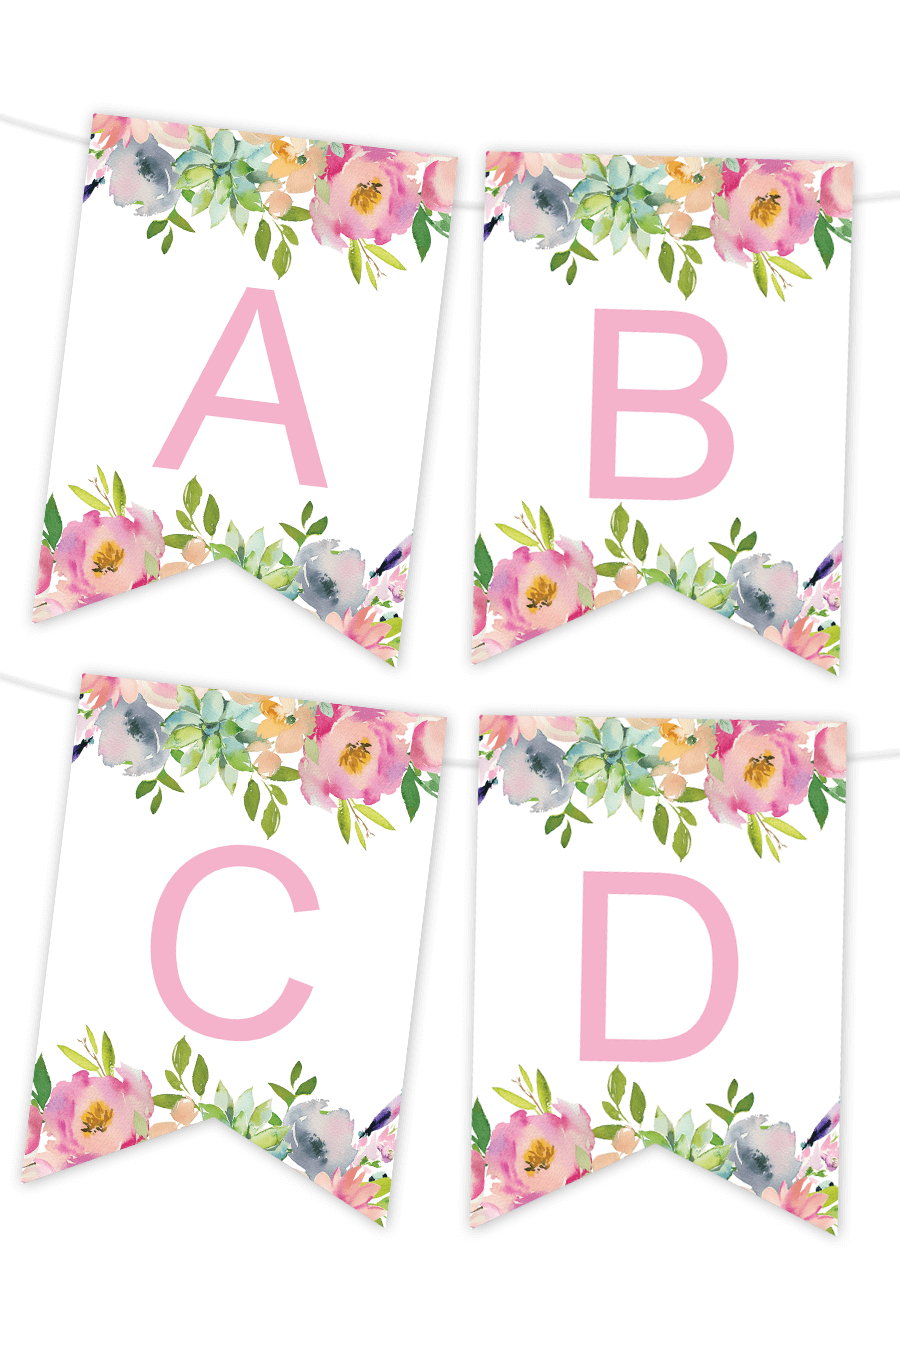 Printable Banners - Make Your Own Banners With Our Printable Templates - Free Printable Banners